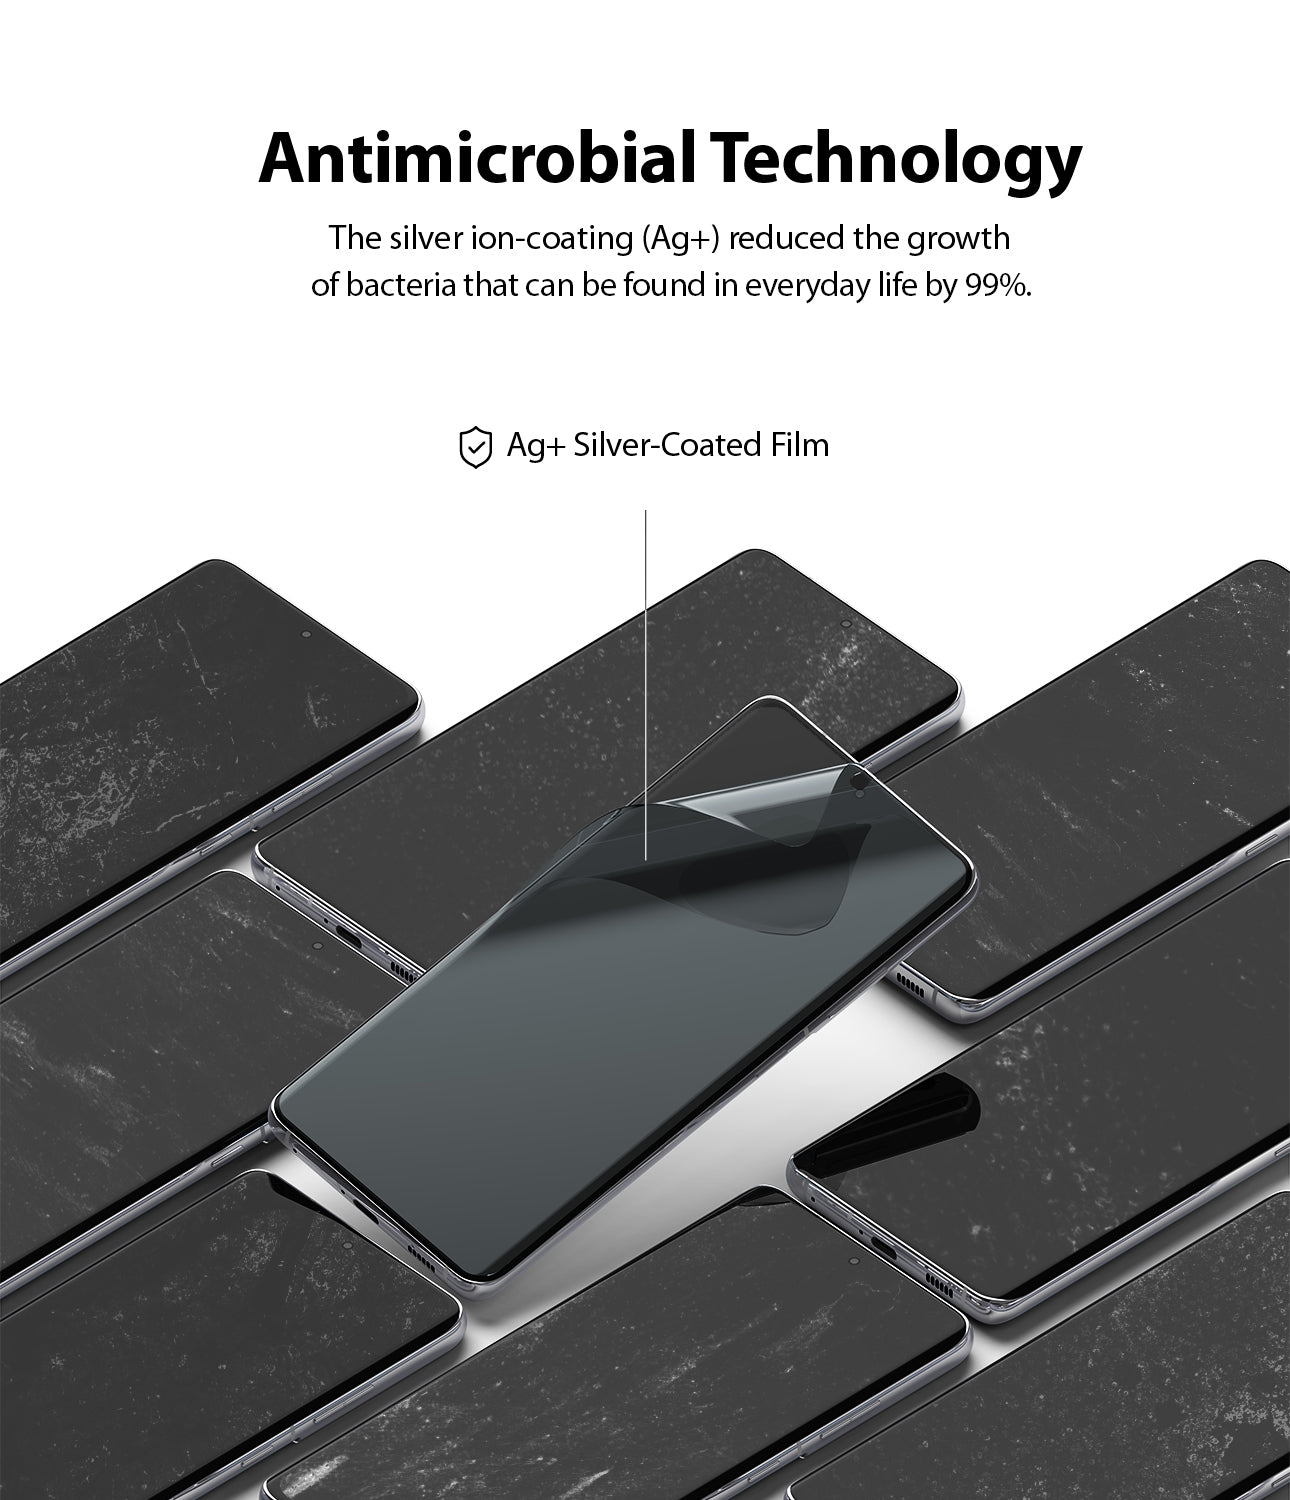 antimicrobial technology with the silver ion coating